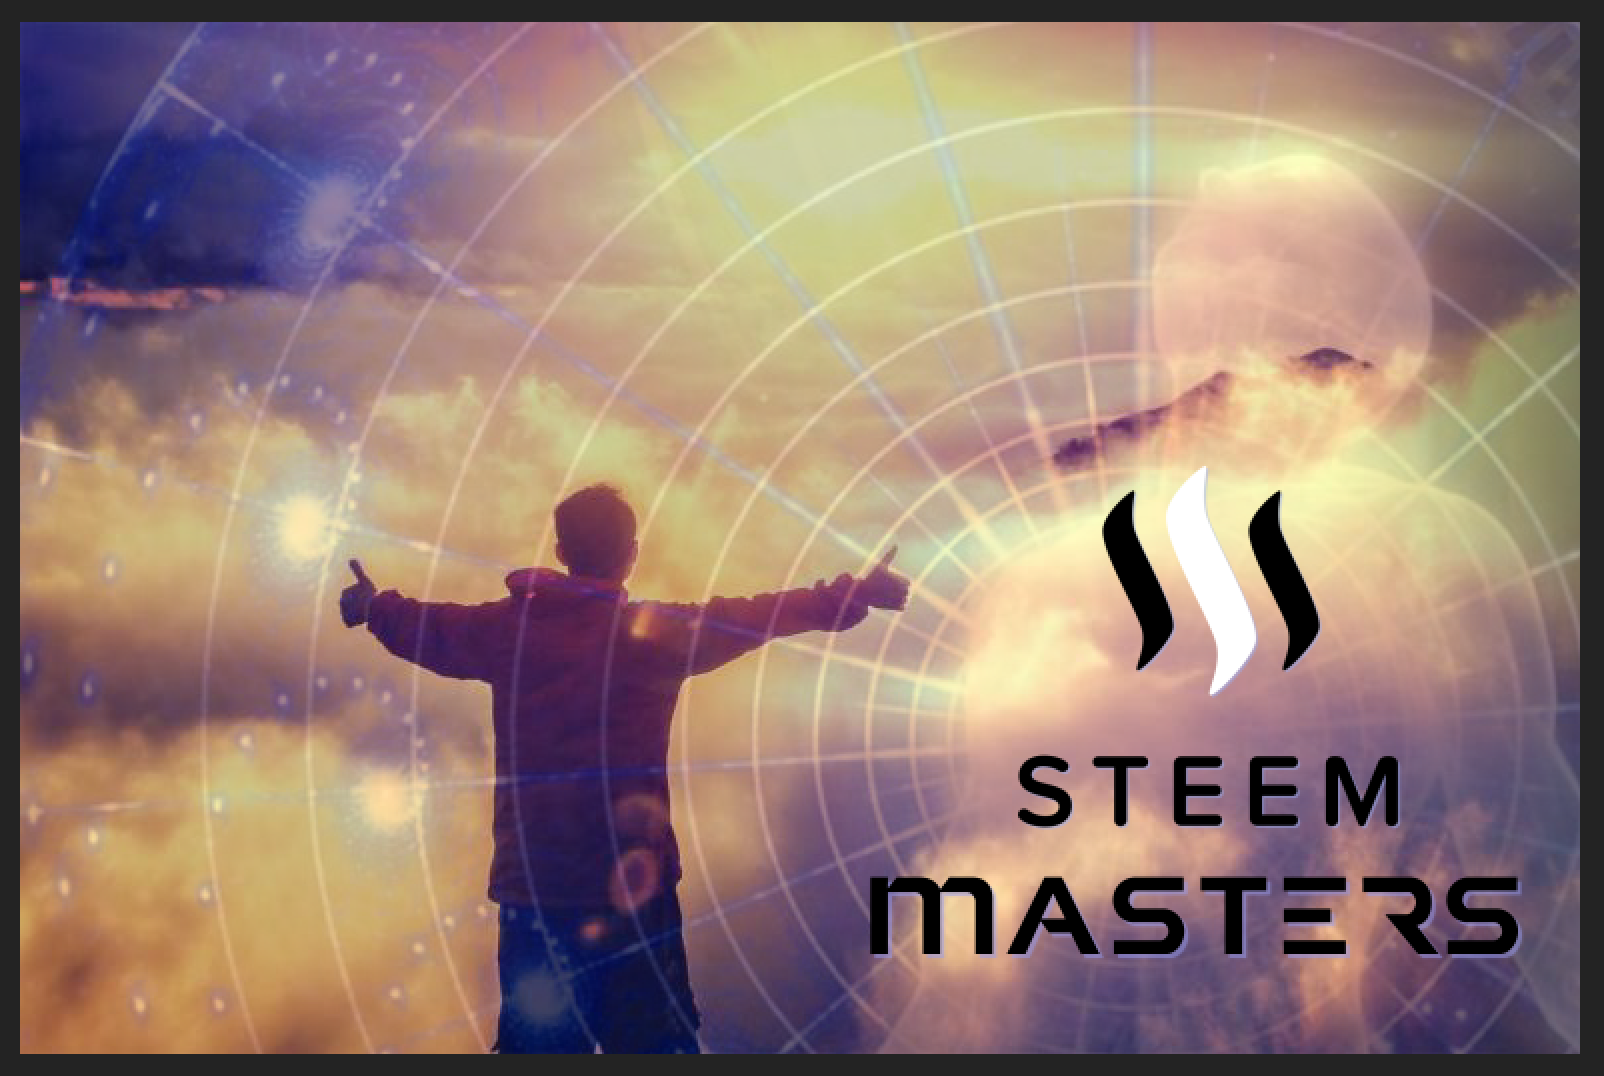 Steem Masters with black banner.png